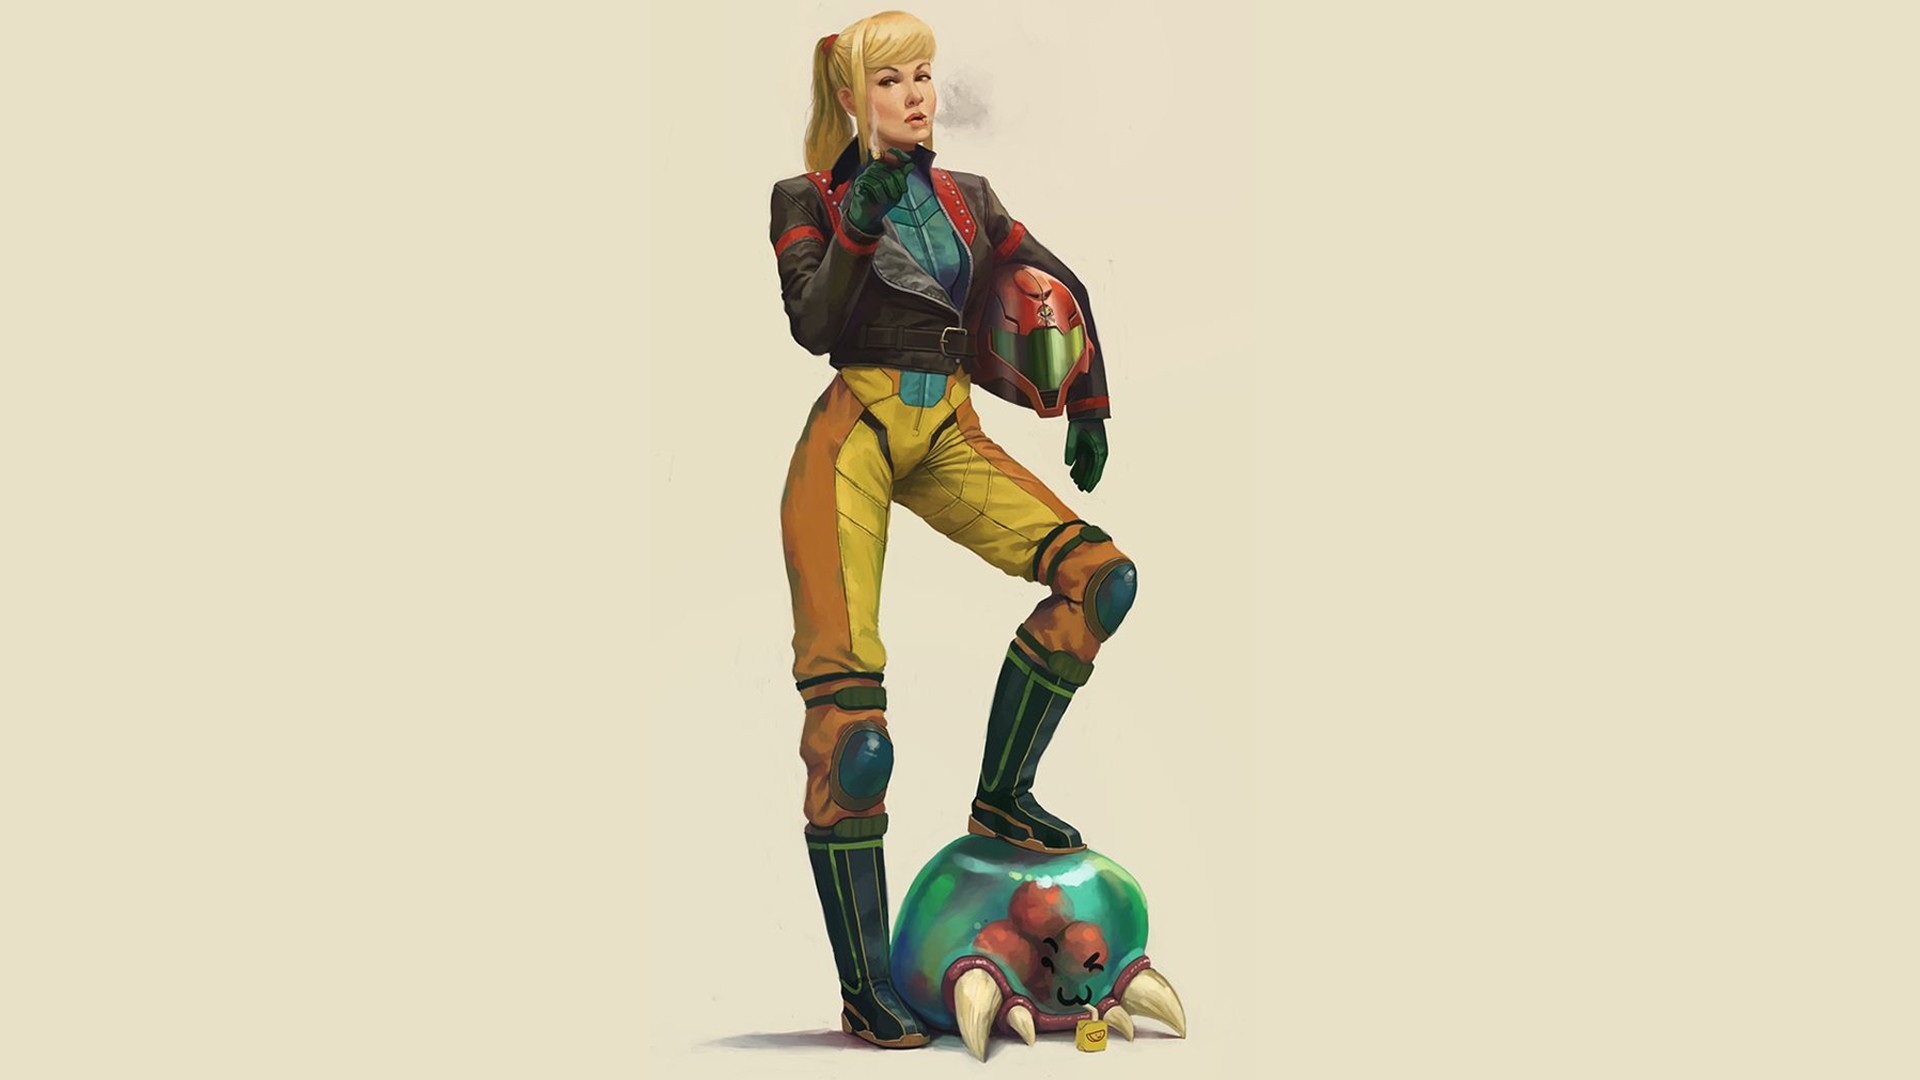 General 1920x1080 Metroid Samus Aran simple background white background helmet fighter pilot outfit video game girls video game art standing science fiction fan art science fiction women blonde video games